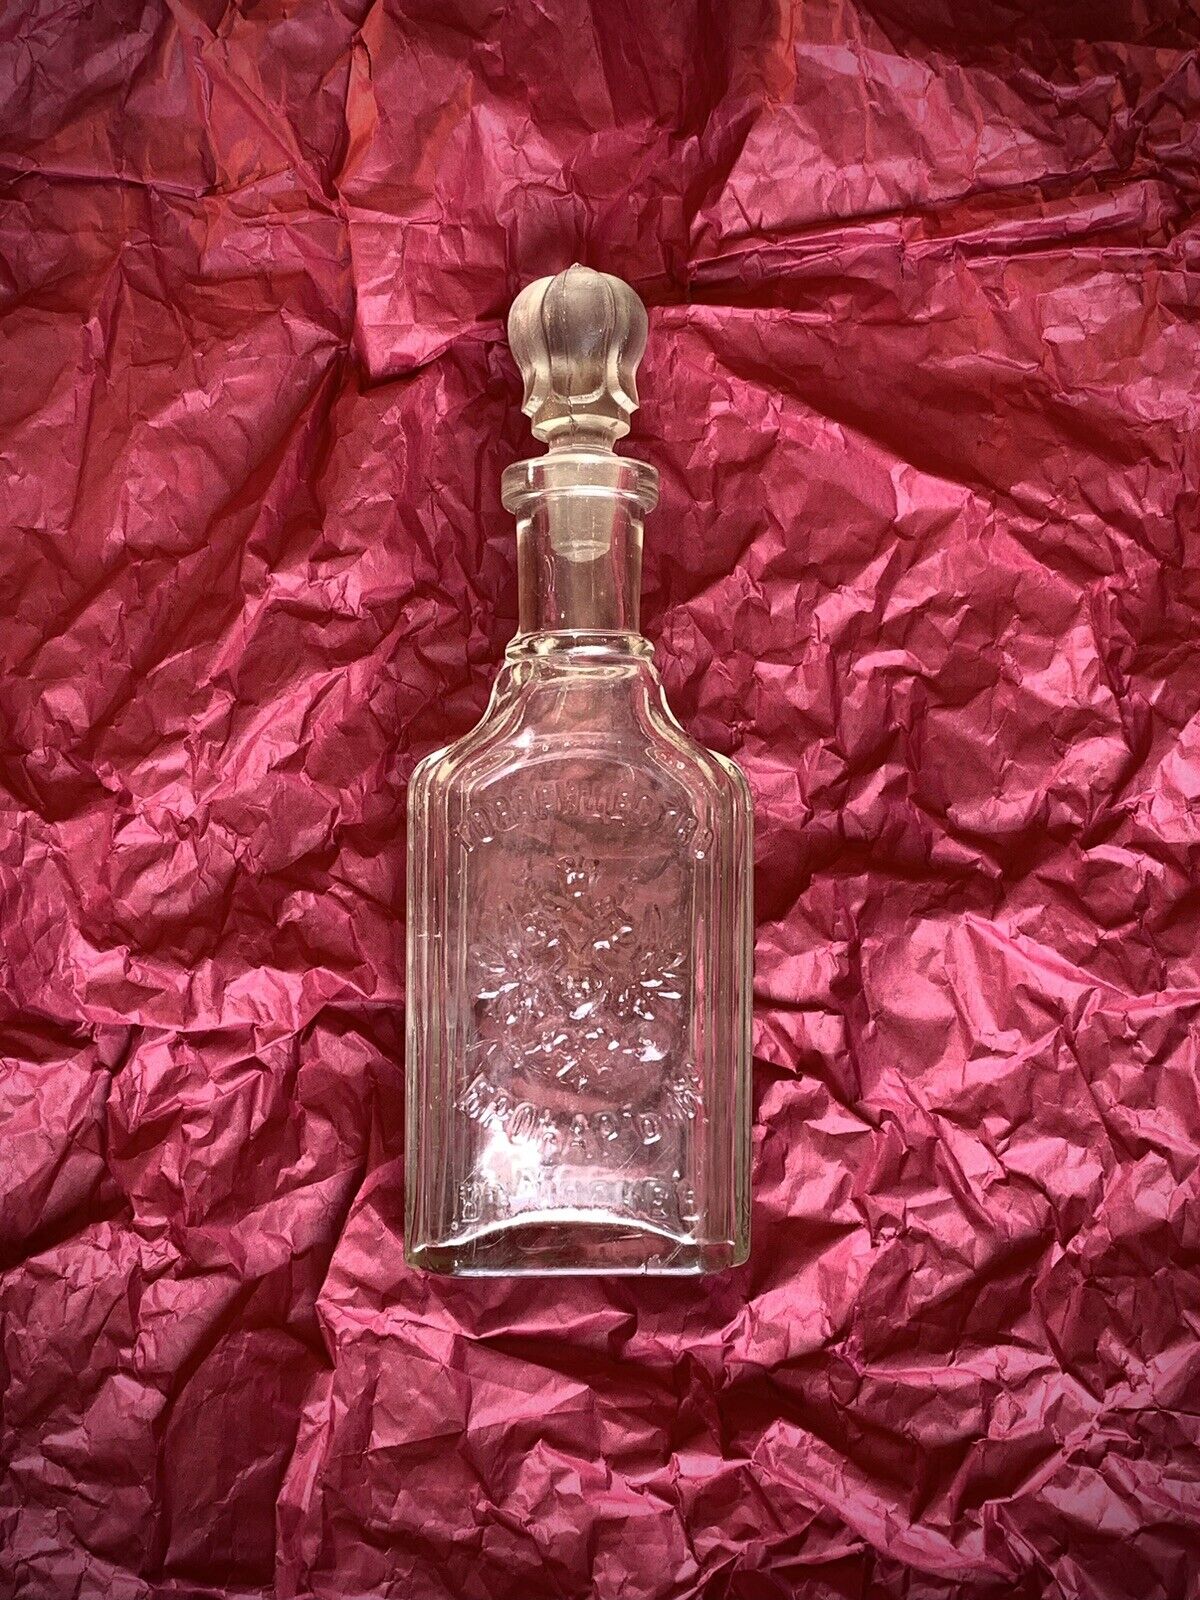 ANTIQUE IMPERIAL RUSSIA GLASS PERFUME BOTTLE  BROCARD & CO IN MOSCOW RARE